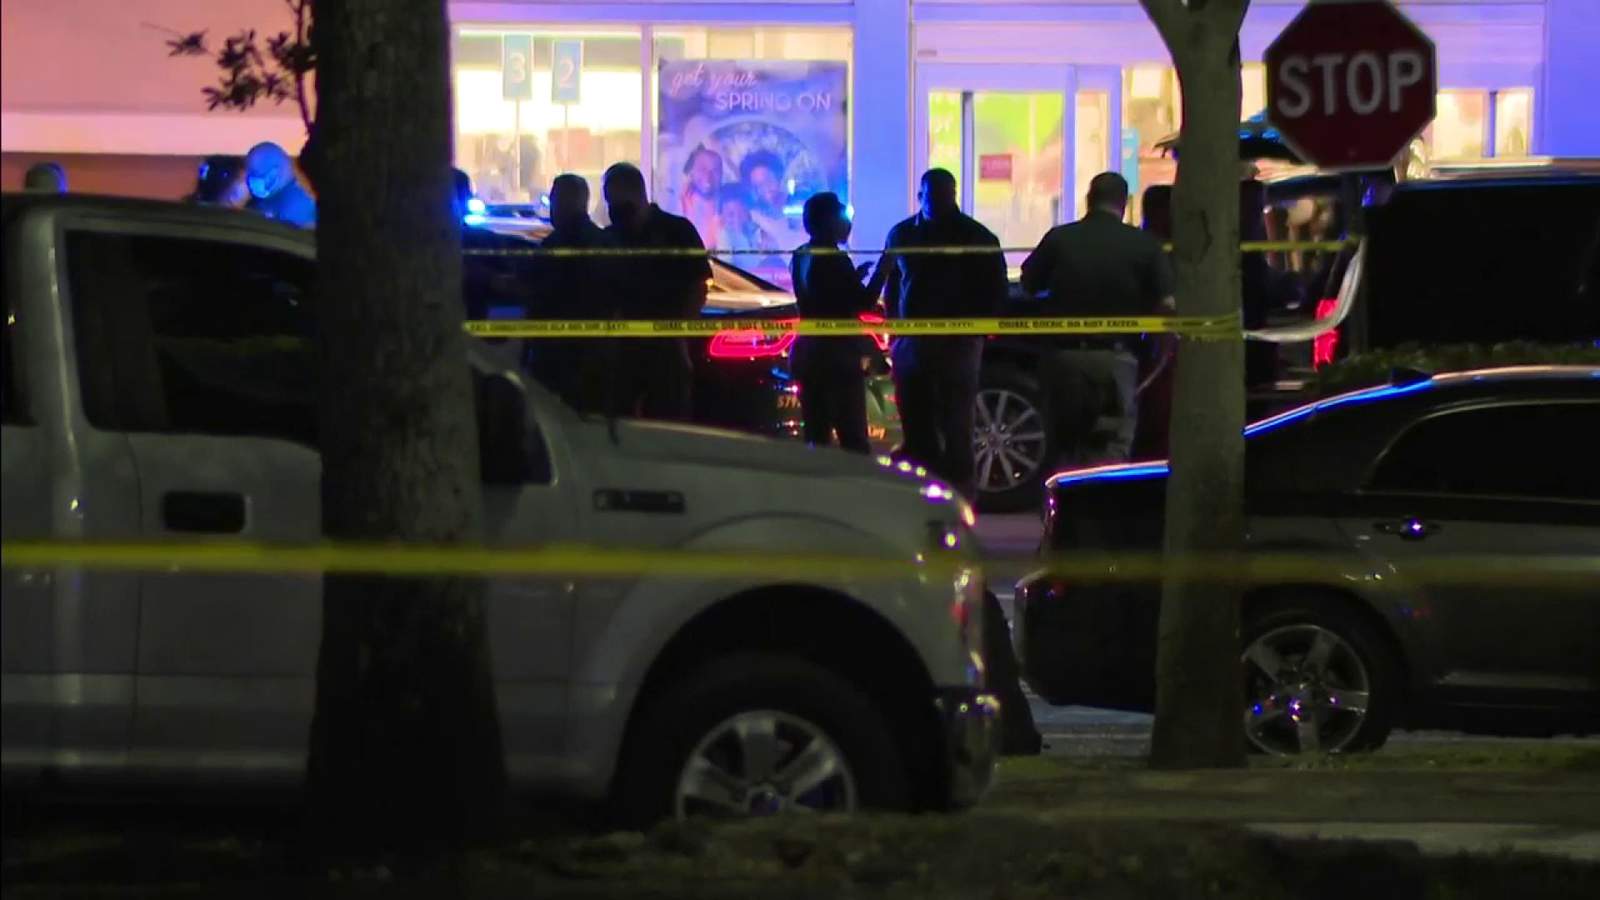 BSO representative fatally shoots man in North Lauderdale mall